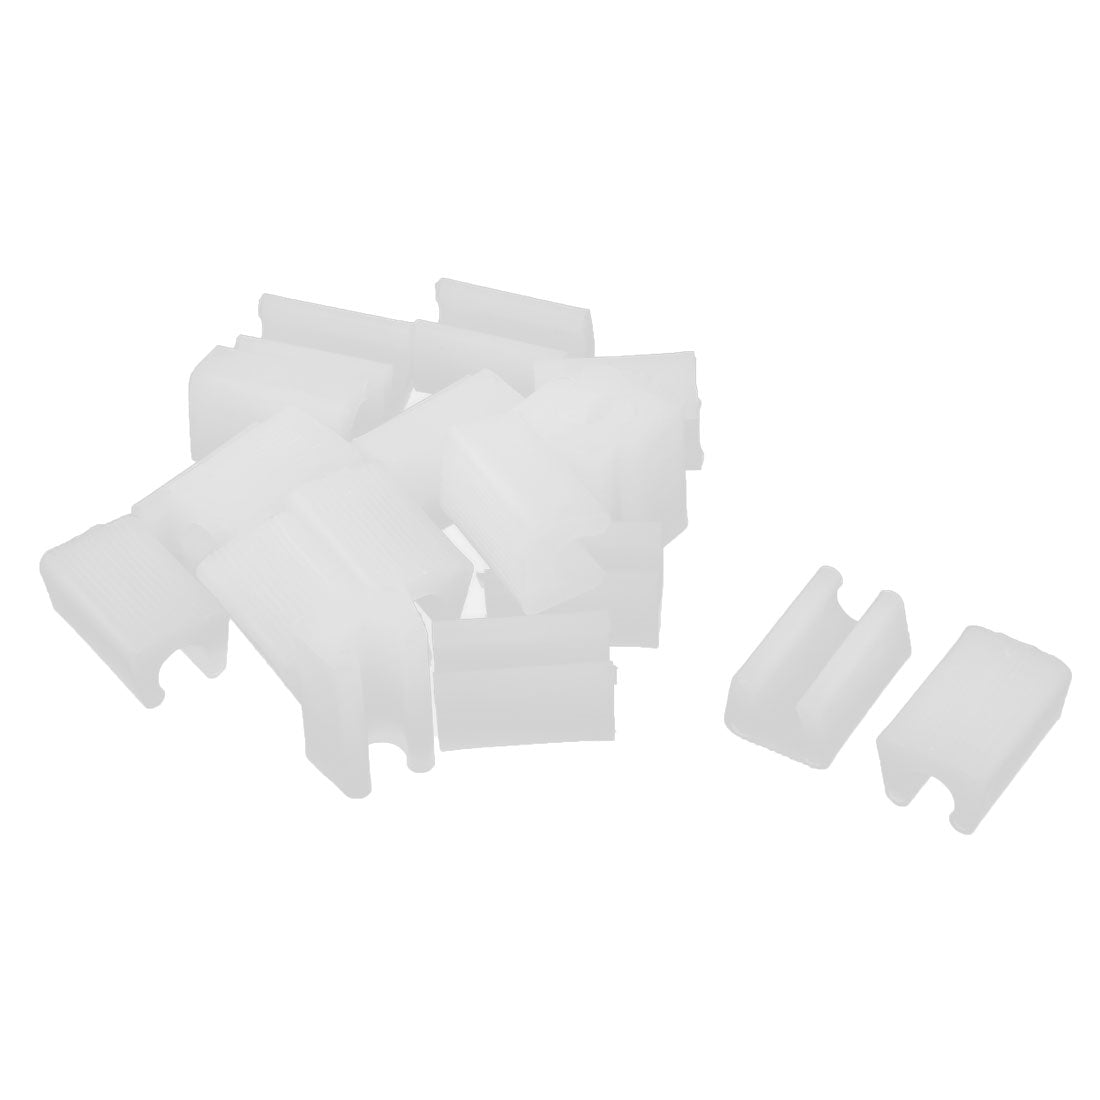 uxcell Uxcell Chair Foot Plastic U Shaped Floor Glides Tubing Caps Cover White 9mm Dia 20pcs